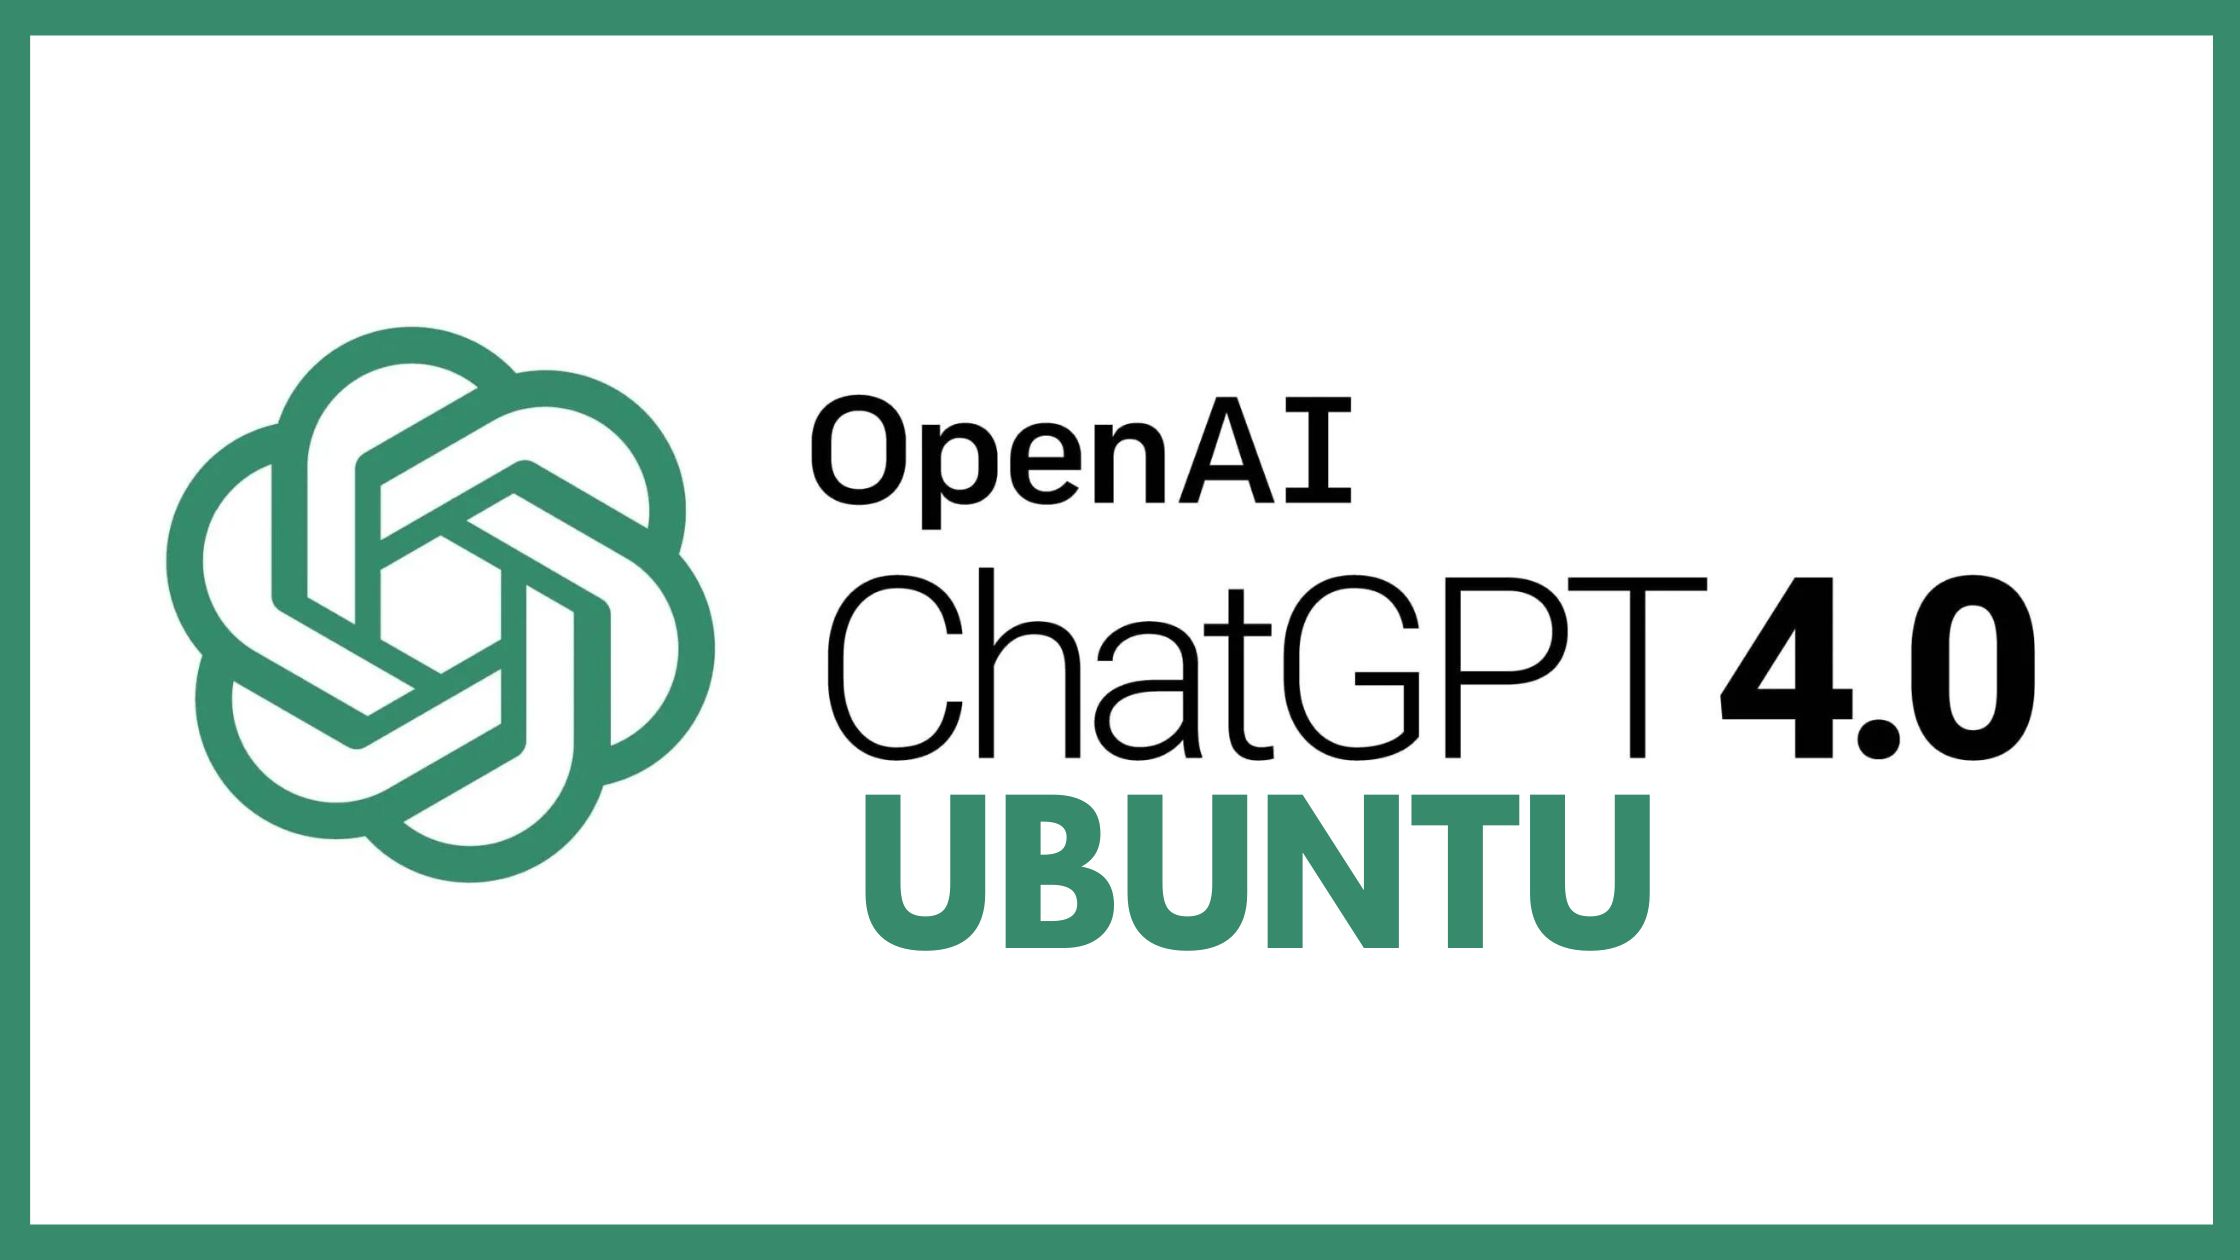 How To Install And Set Up Auto-GPT On Ubuntu